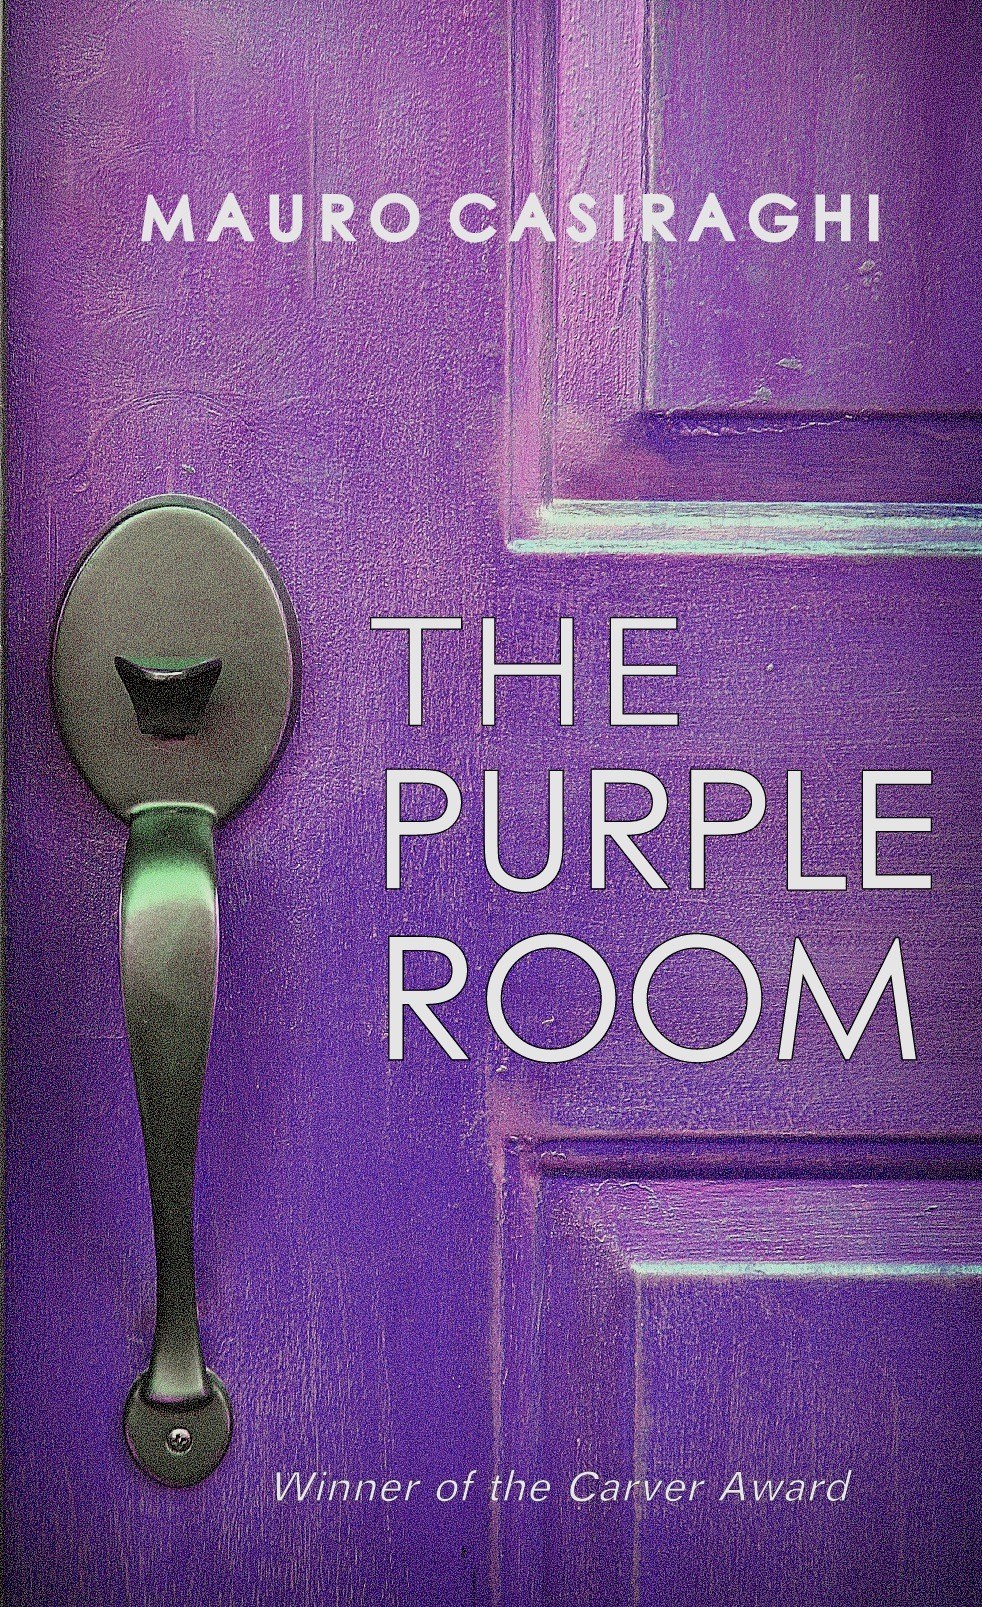 FREE: The Purple Room by Mauro Casiraghi